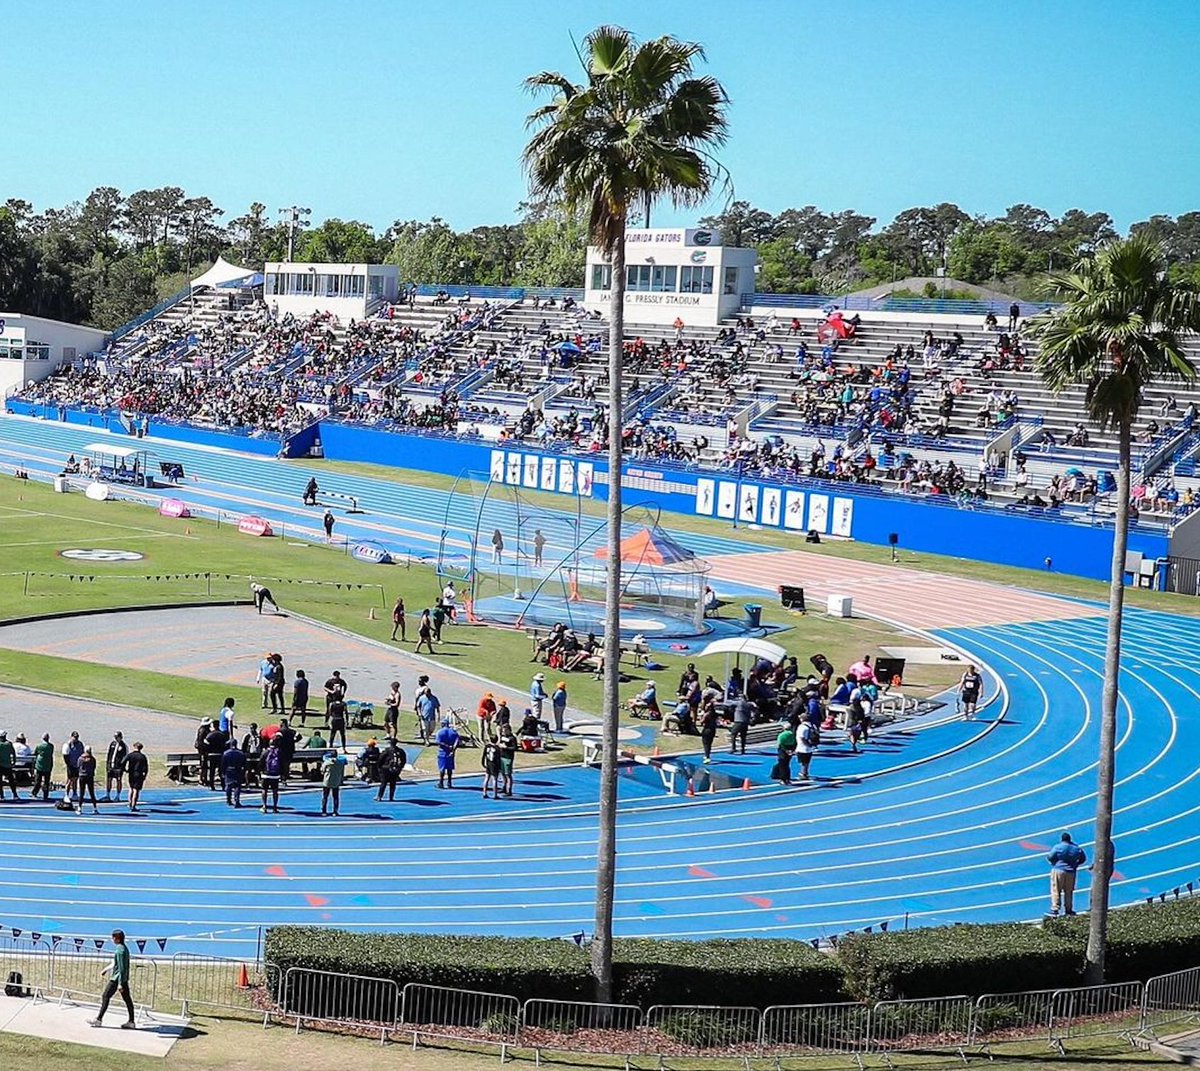 Now this is a beautiful track🌴🐊 SEC's at @GatorsTF